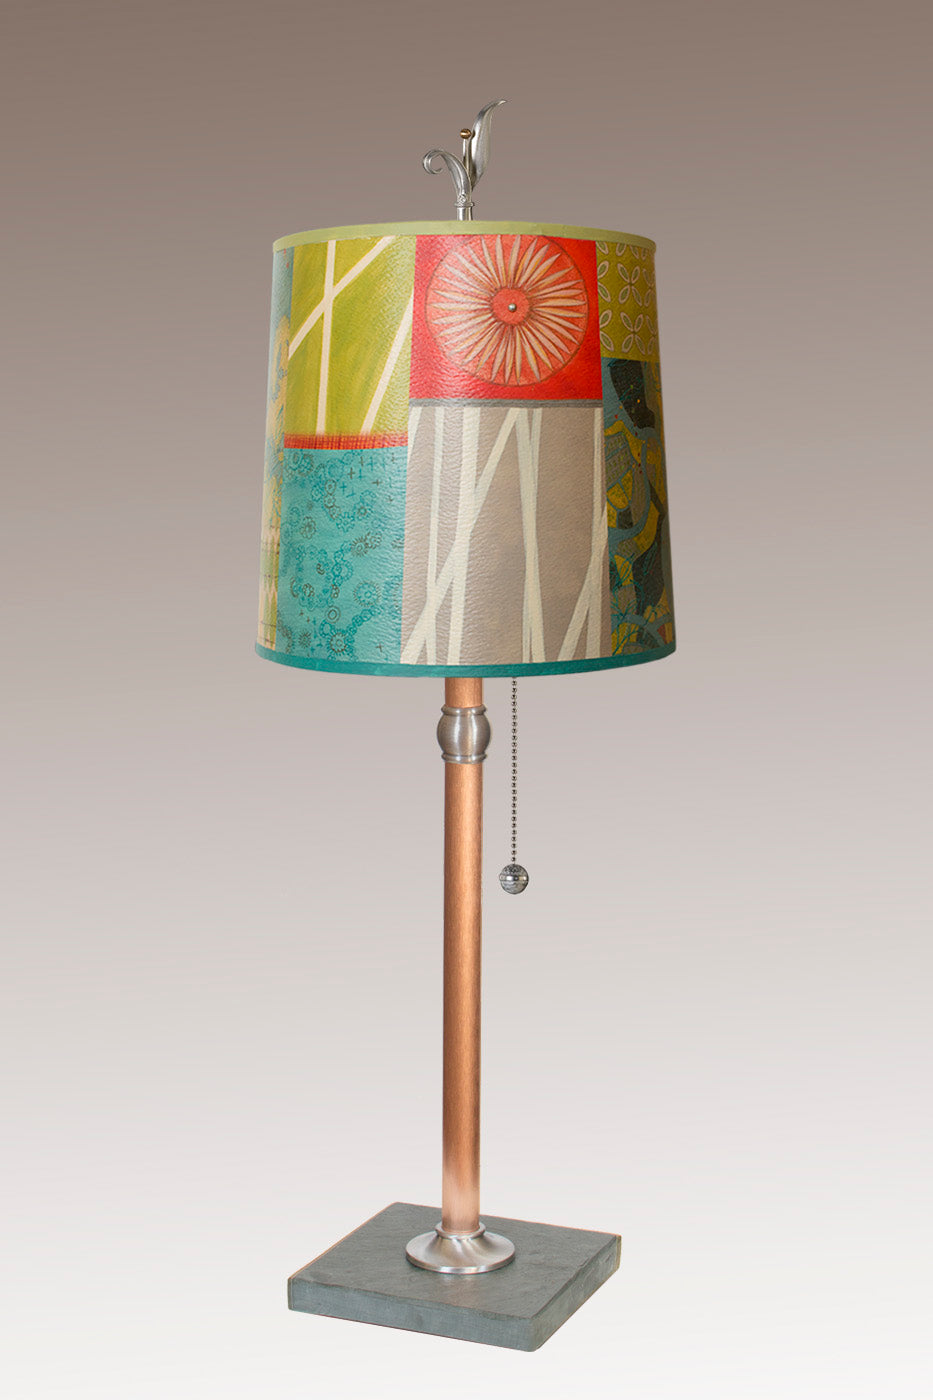 Copper Table Lamp with Medium Drum Shade in Zest